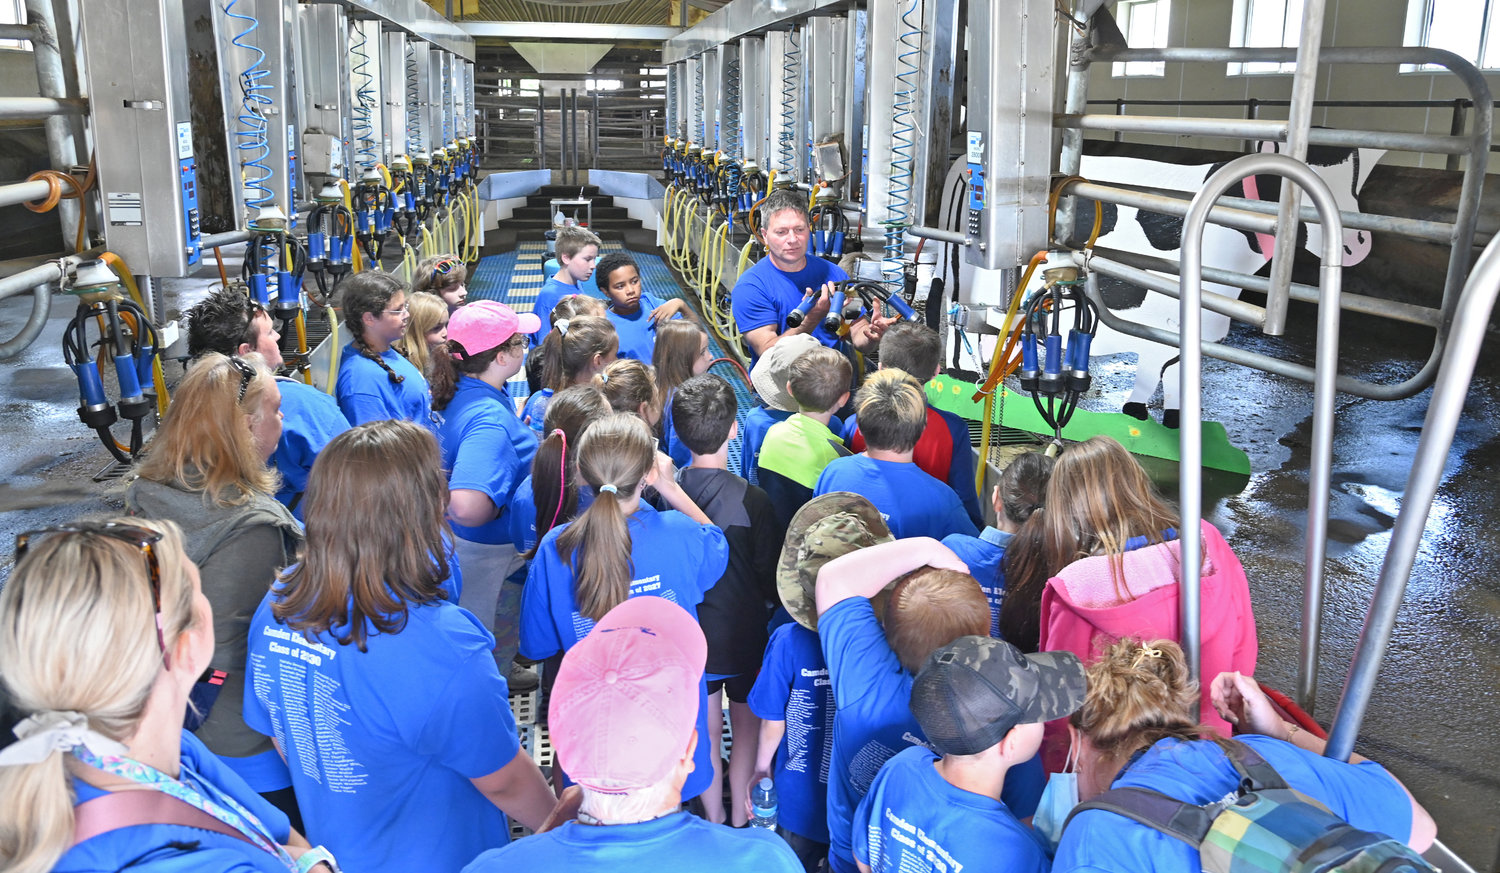 FARM FEST — Pat Van Lieshout explains the milking process to Camden Elementary School students during Farm Fest activities at the DiNitto Farm on Benton Road in Marcy on Friday. Hundreds of youngsters from across the region toured the farm, learning about agriculture, farm life and how food goes from the farm to the plate.